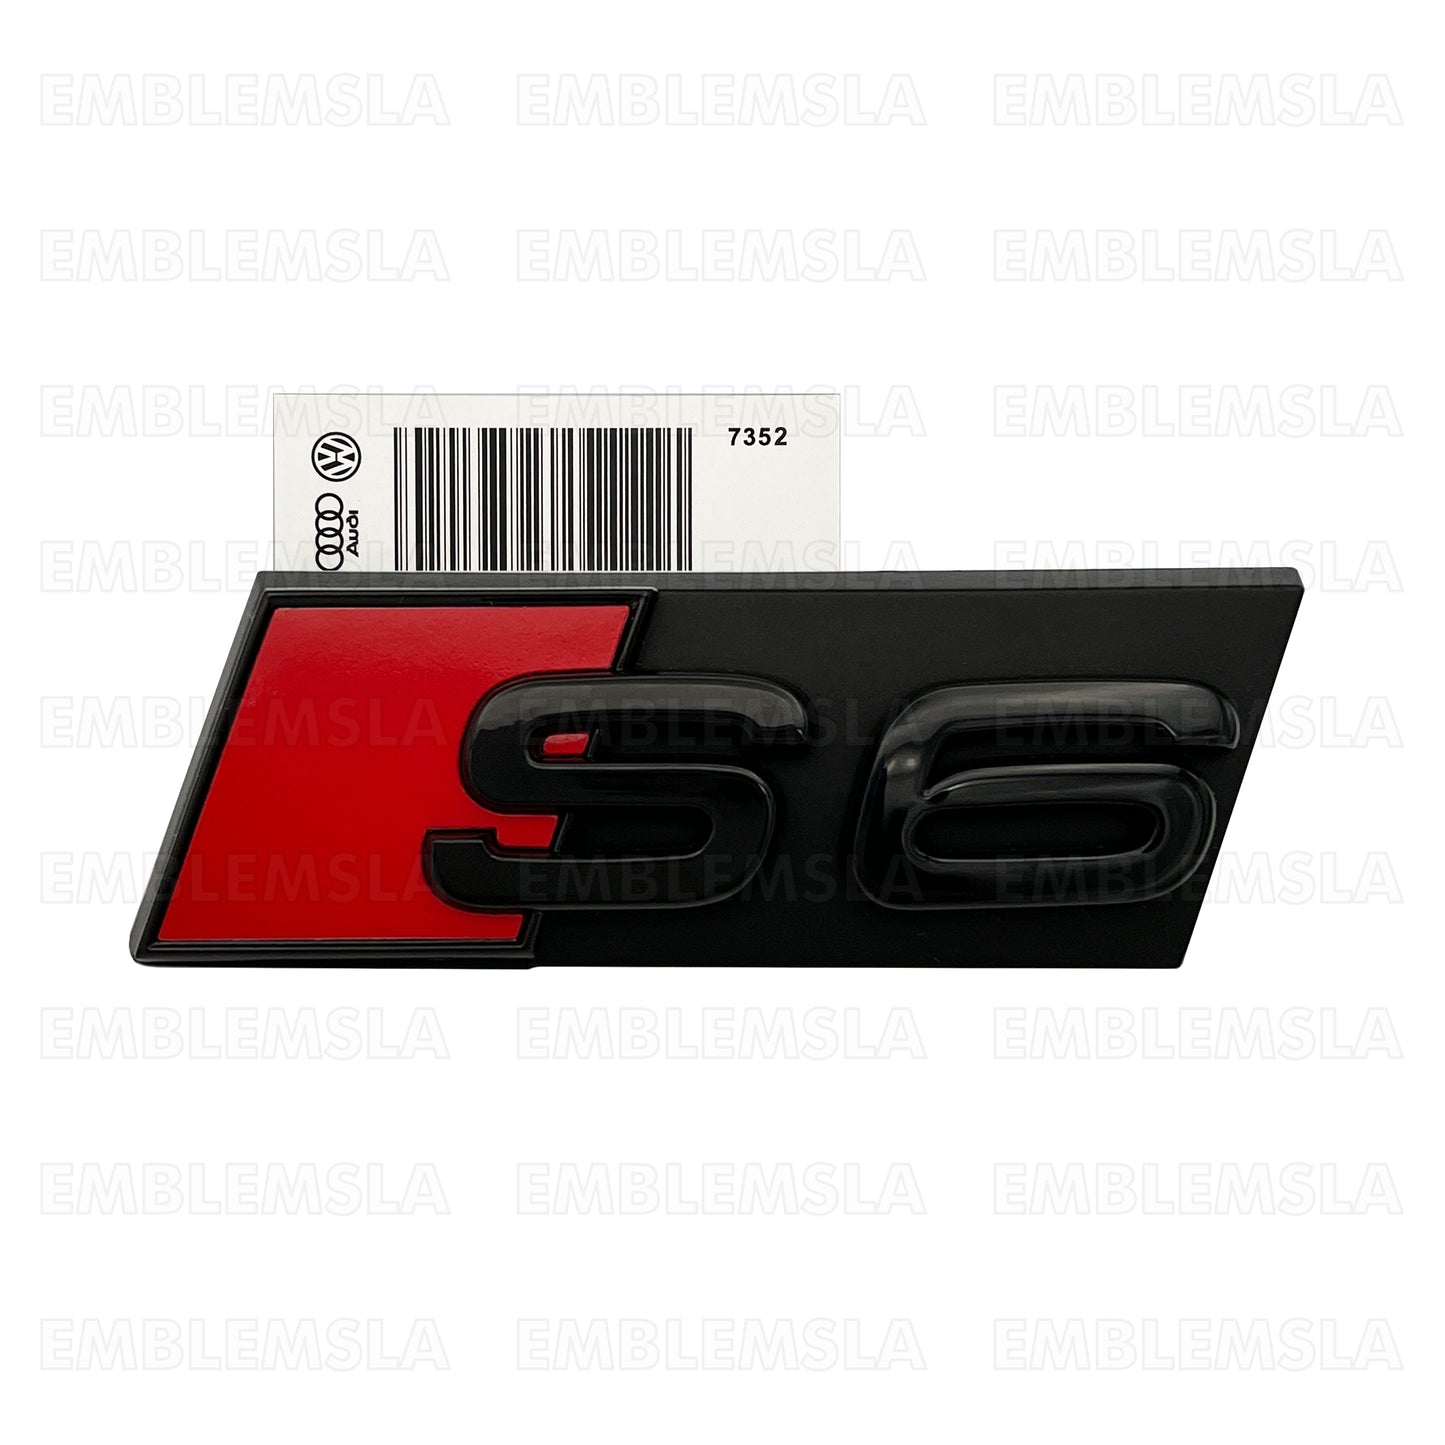 Audi S6 Front Grill Emblem Gloss Black for A6 S6 Hood Grille Badge Nameplate